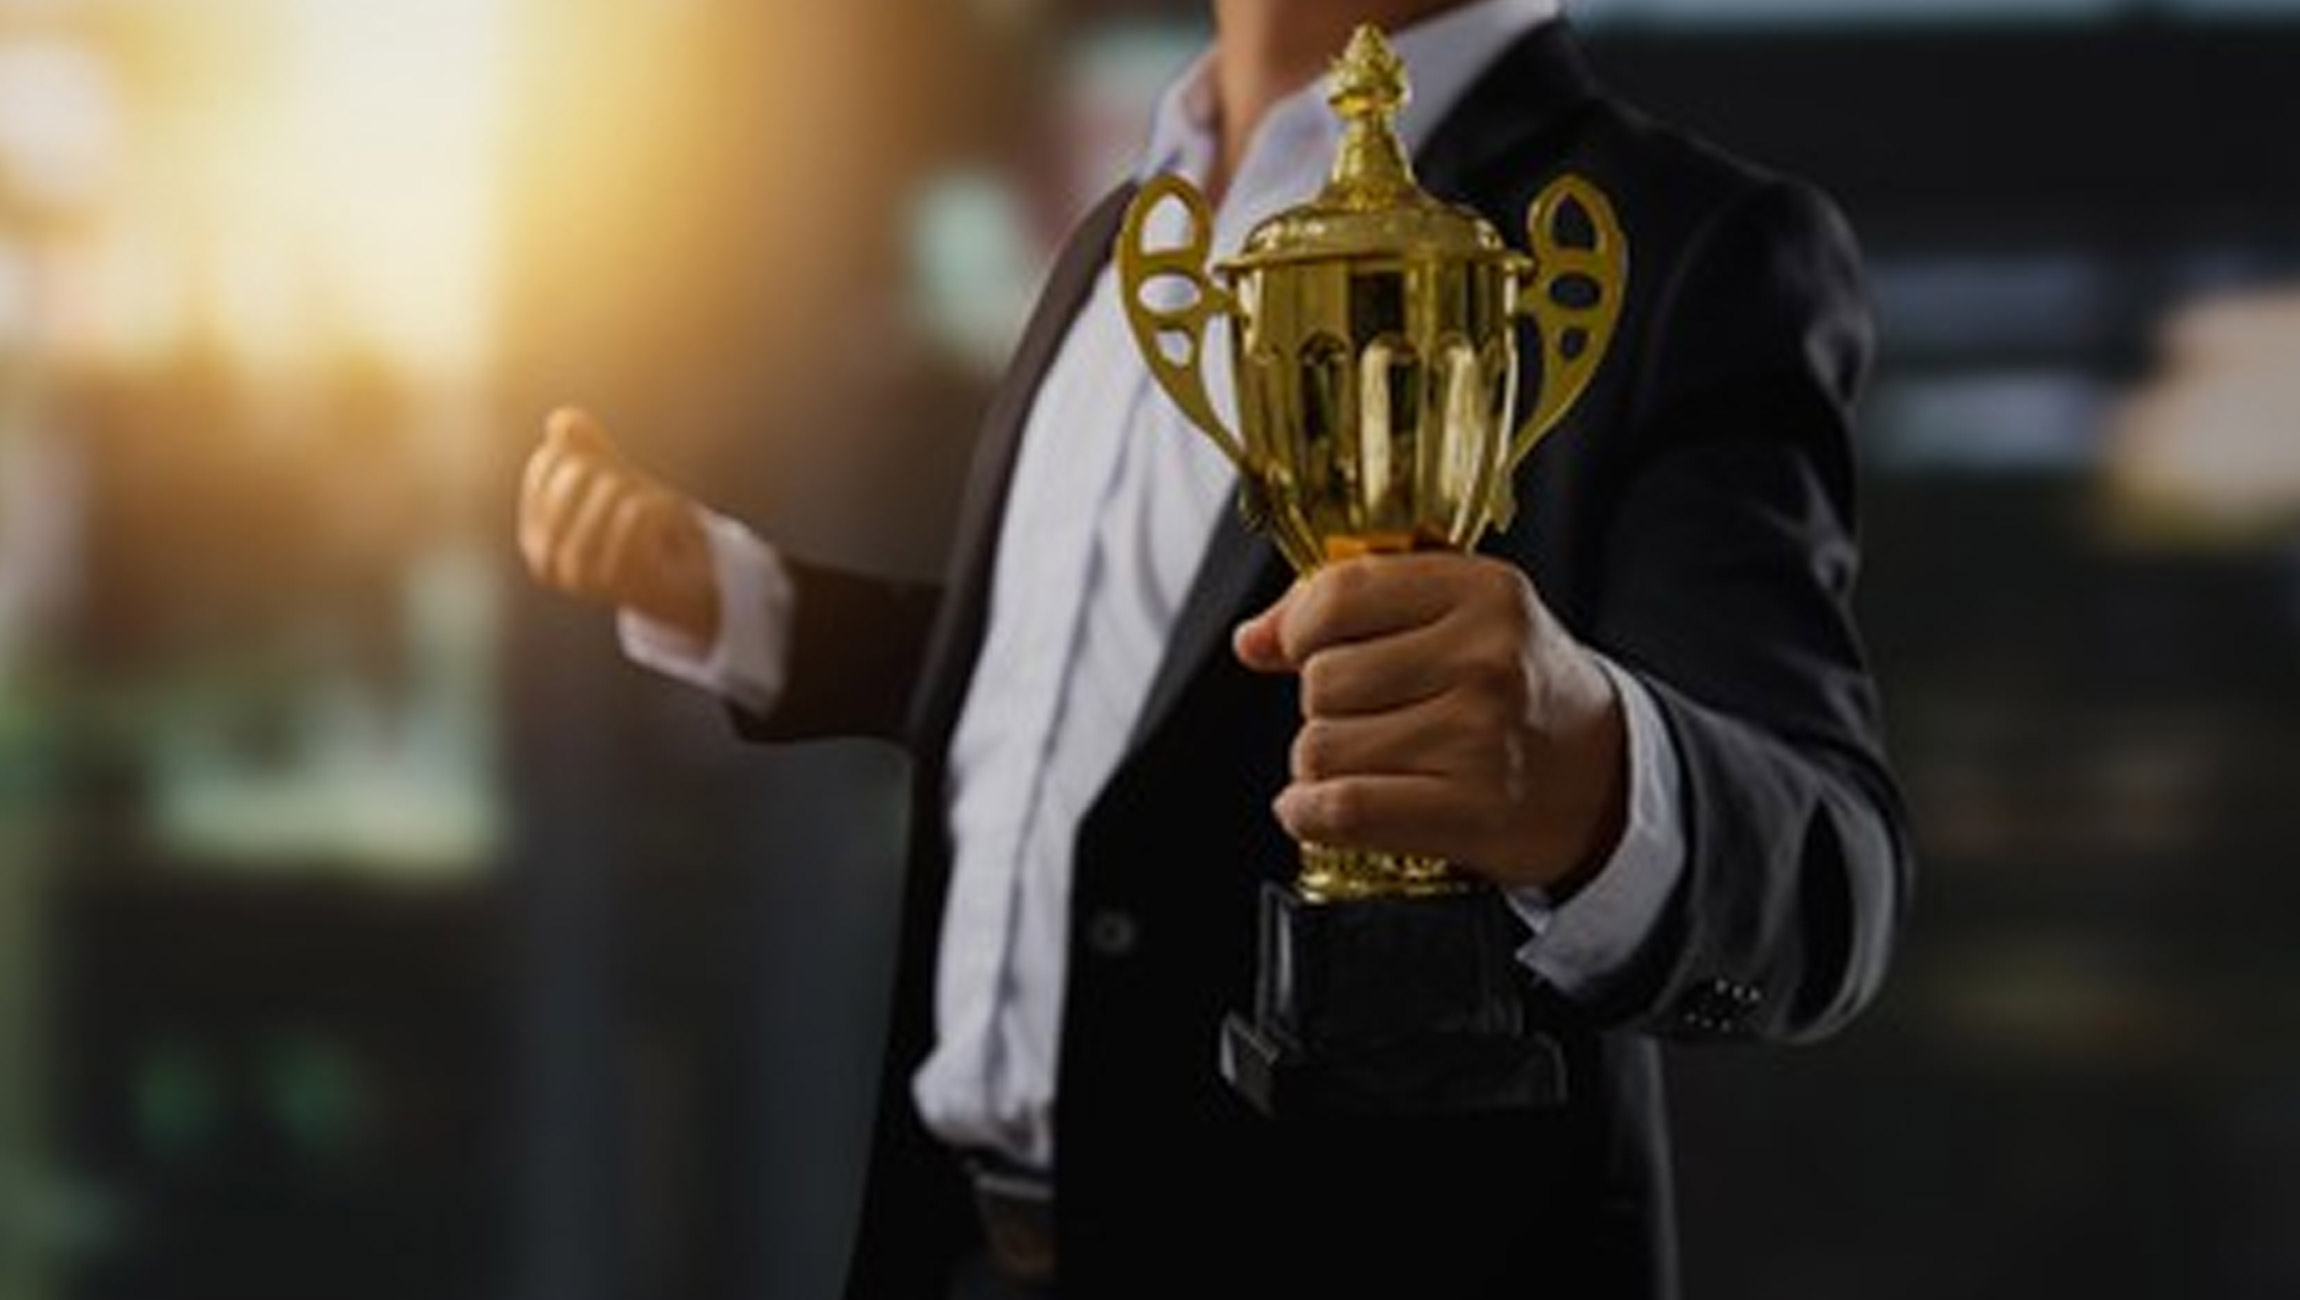 Acquco Launches Inaugural 3PS Awards for Third-party Sellers